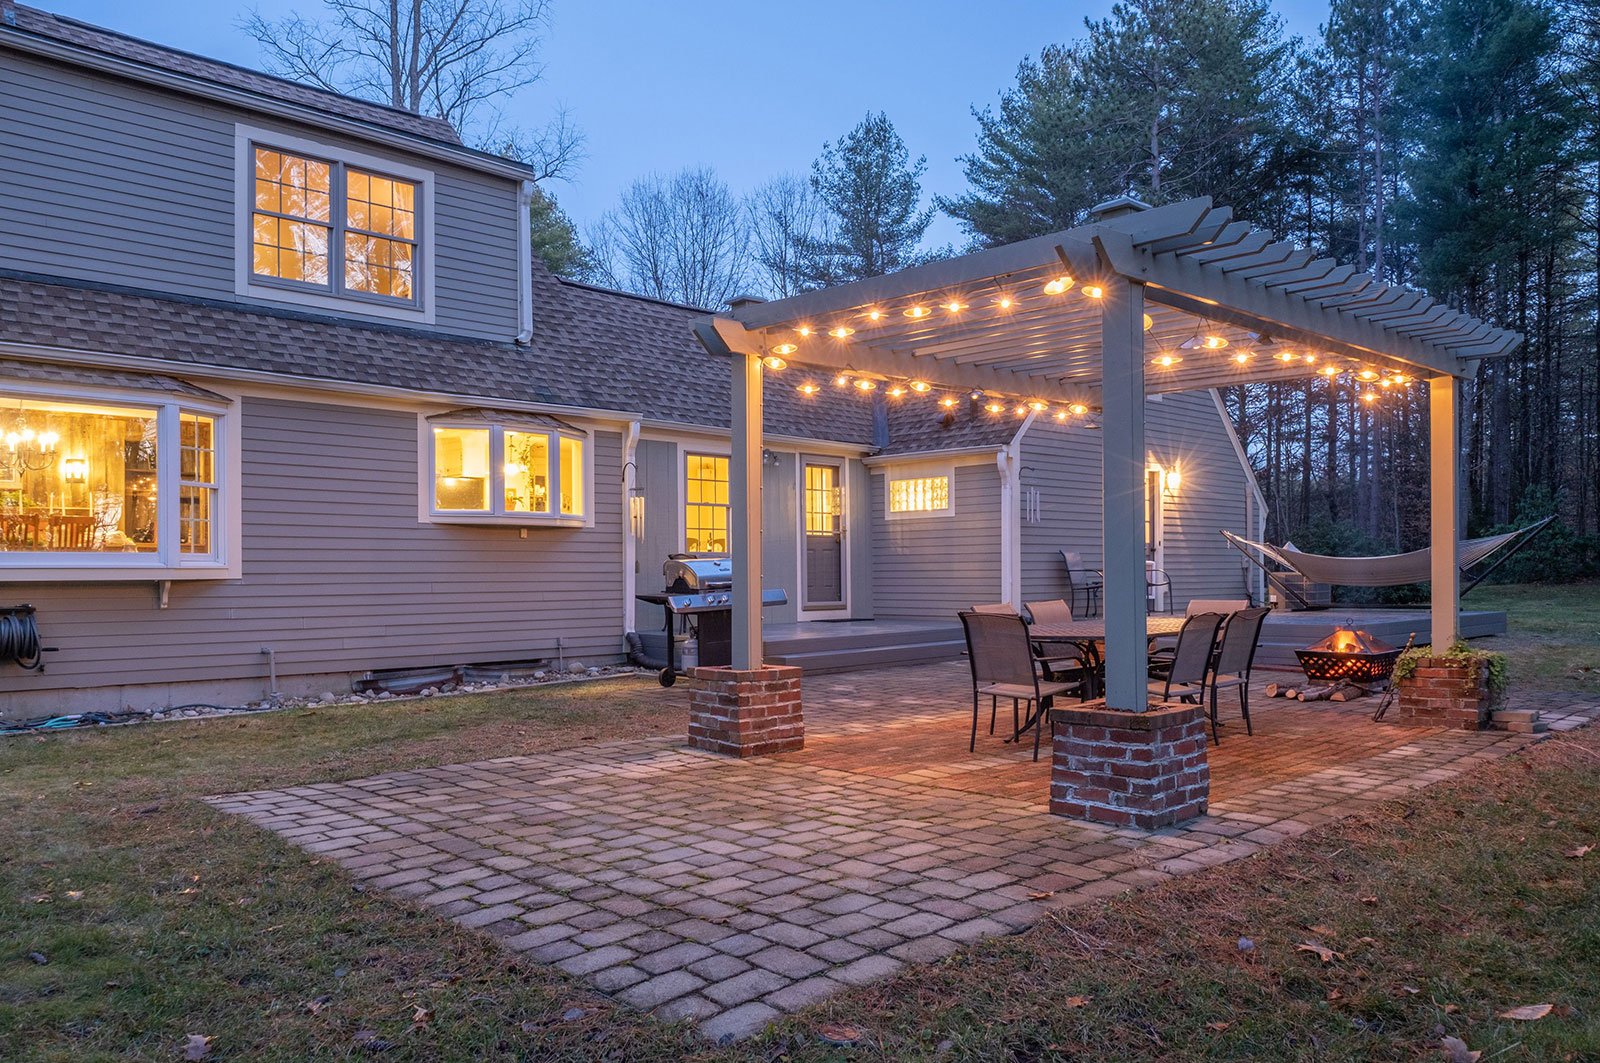 Lighting Safety Tips for Outdoor Environments